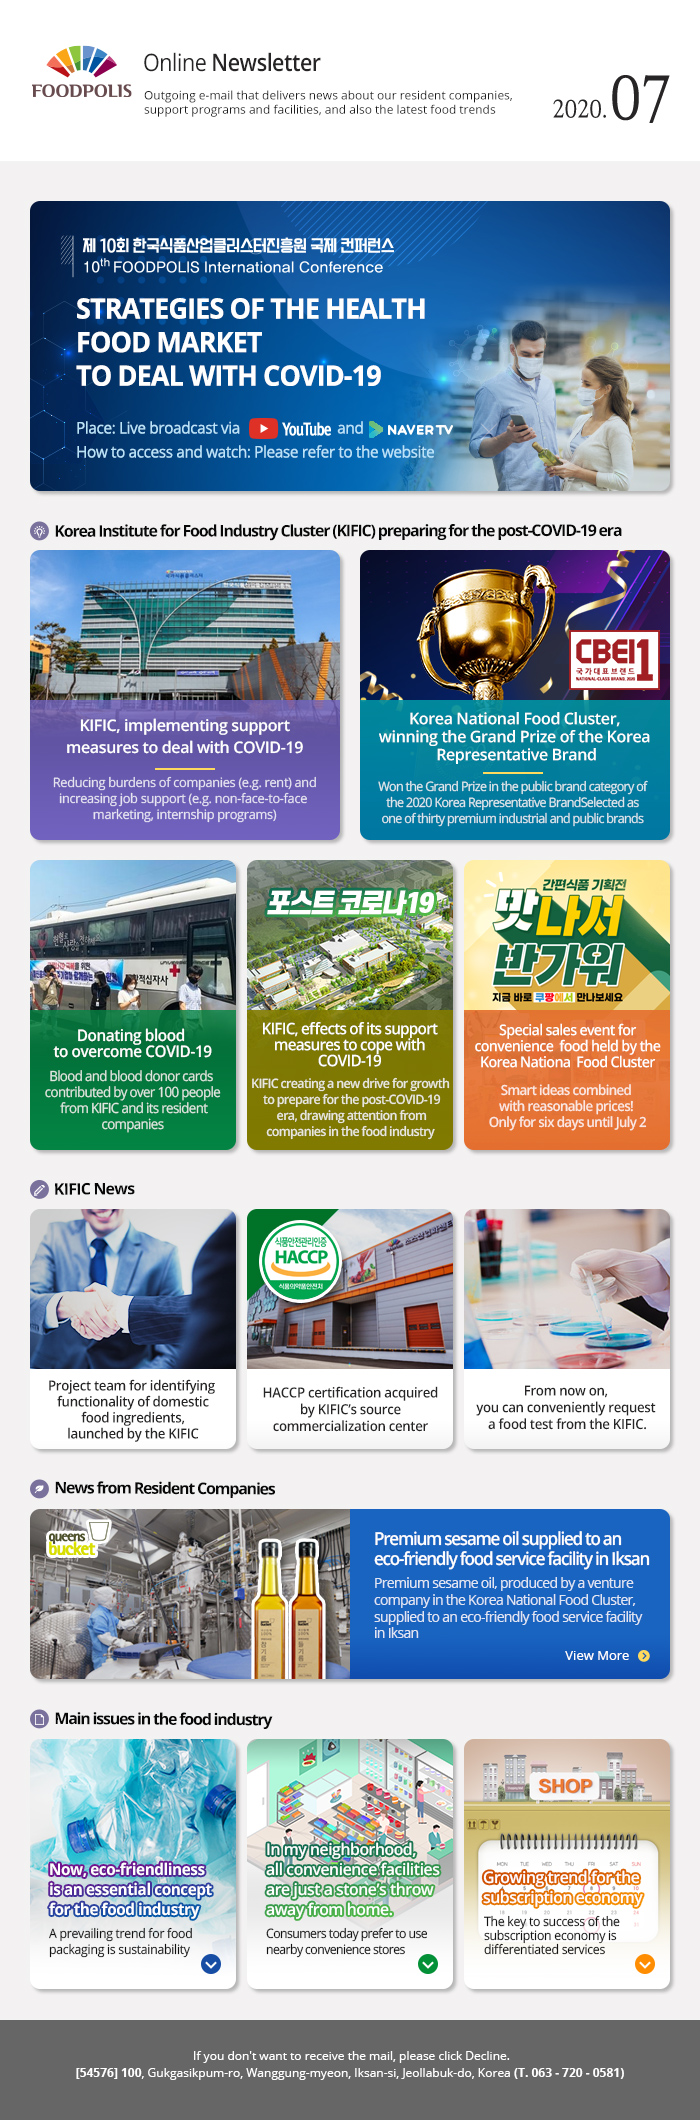 2020 July News Letter from the Korea National Food Cluster